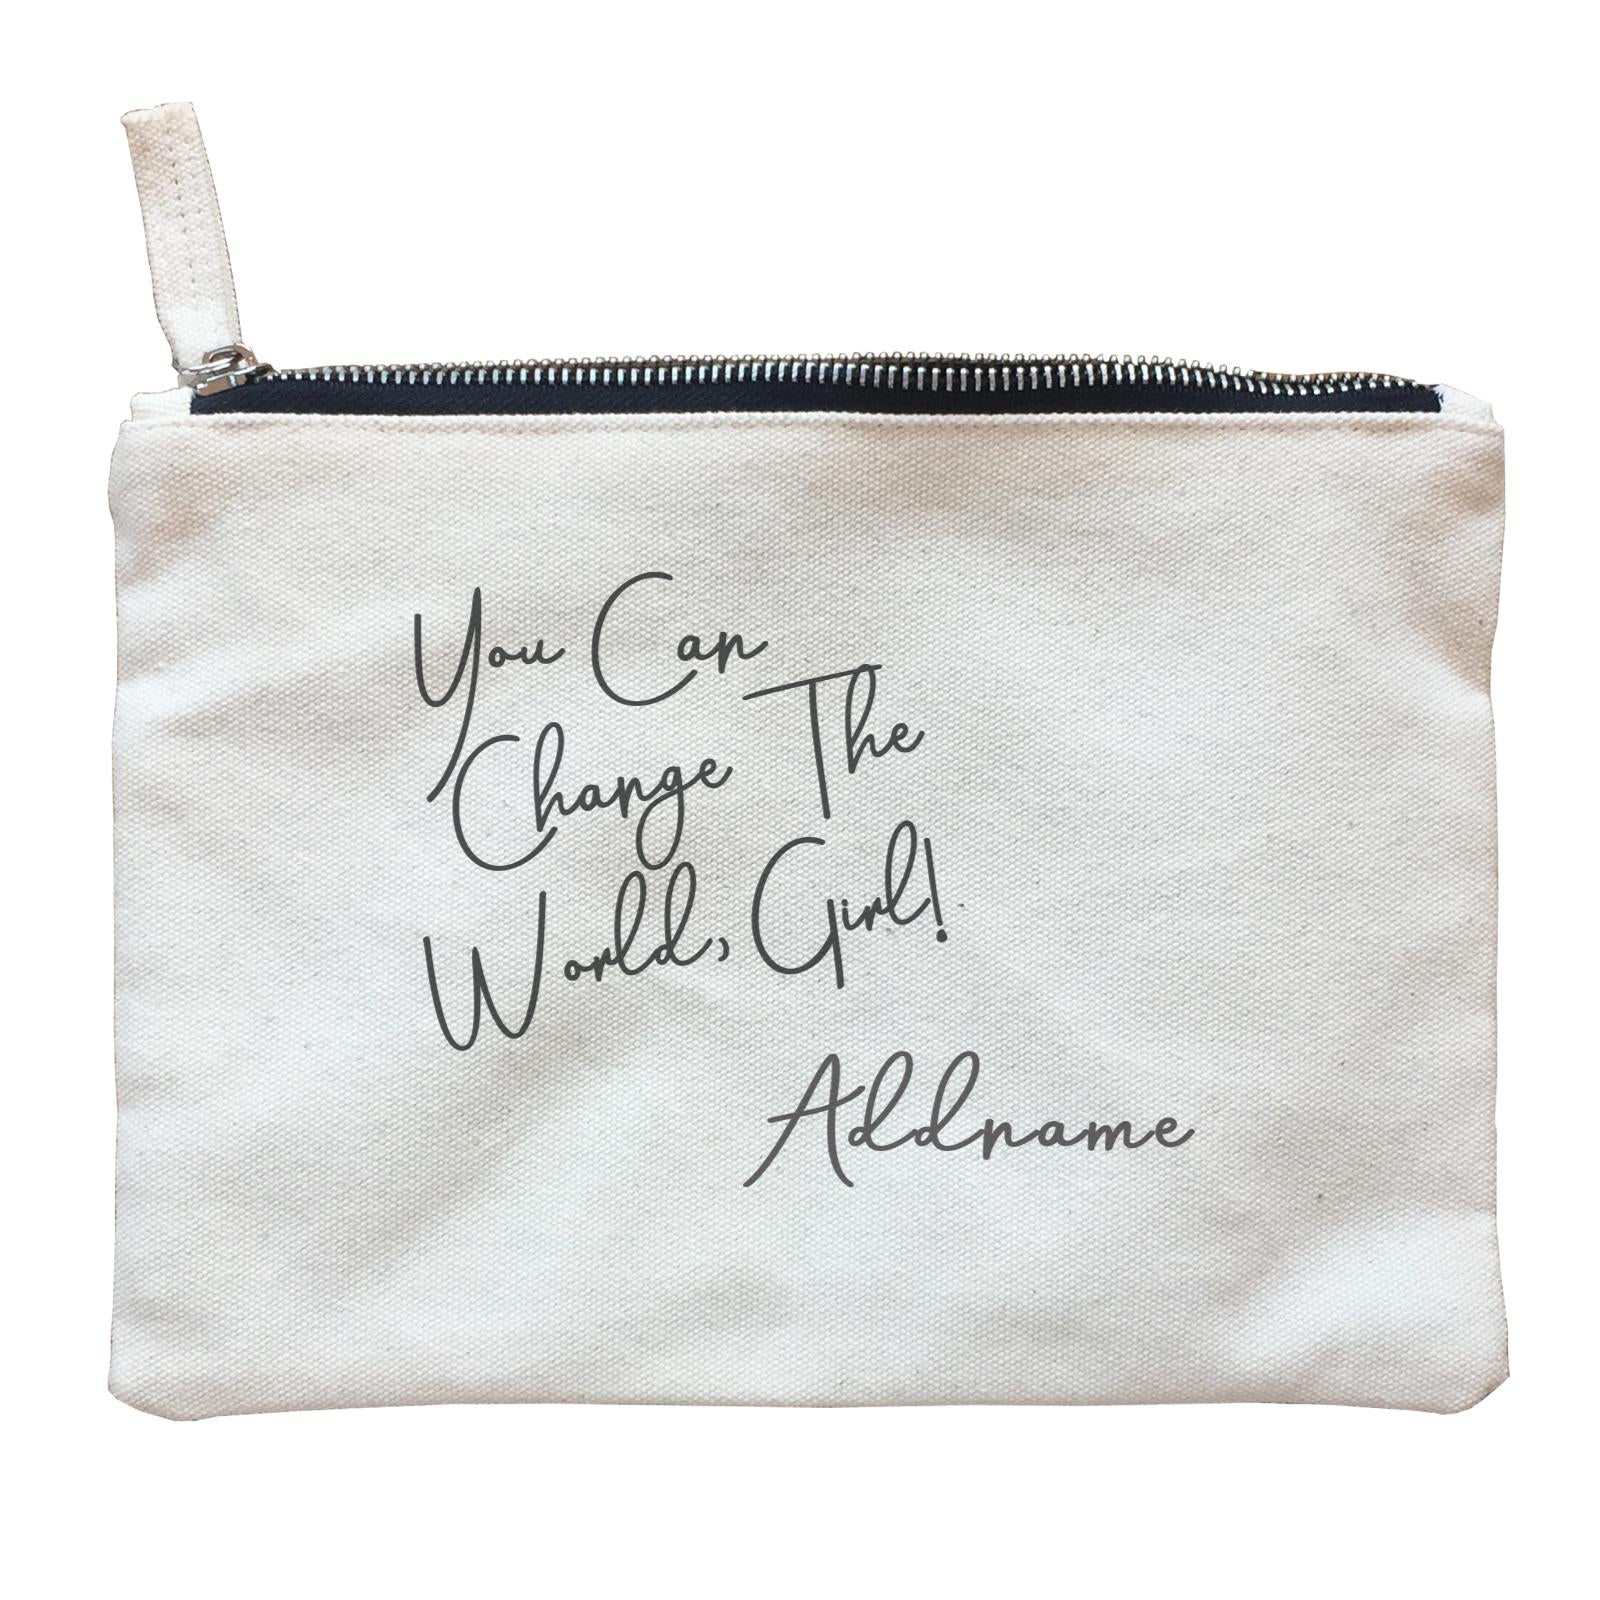 Girl Boss Quotes You Can Change The World Girl Addname Zipper Pouch